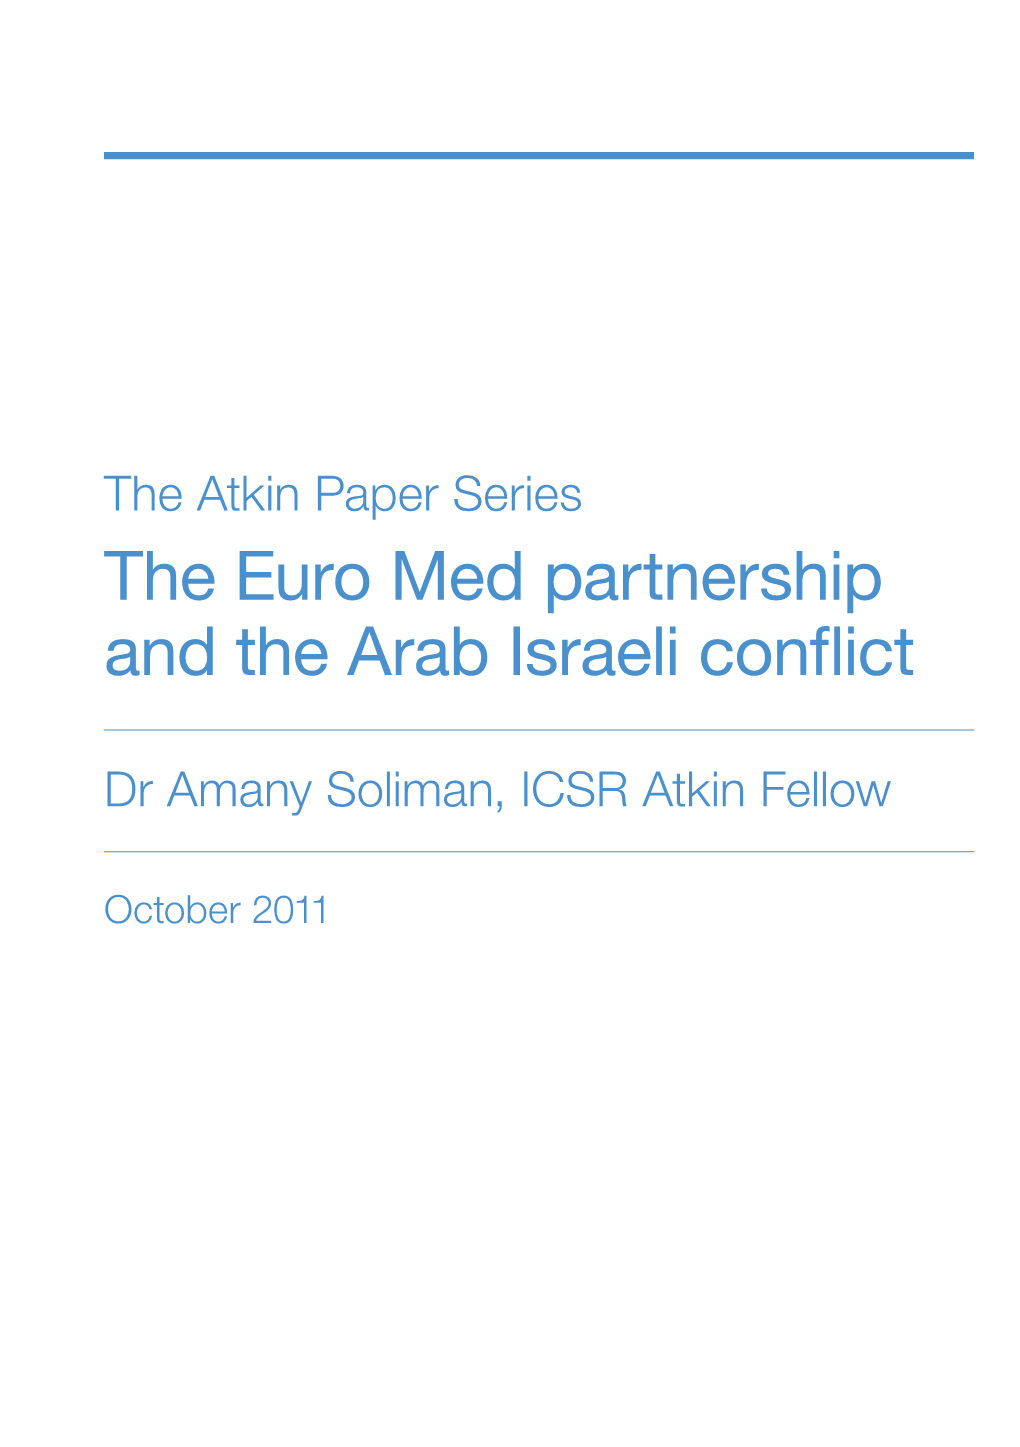 The Euro Med Partnership and the Arab Israeli Conflict